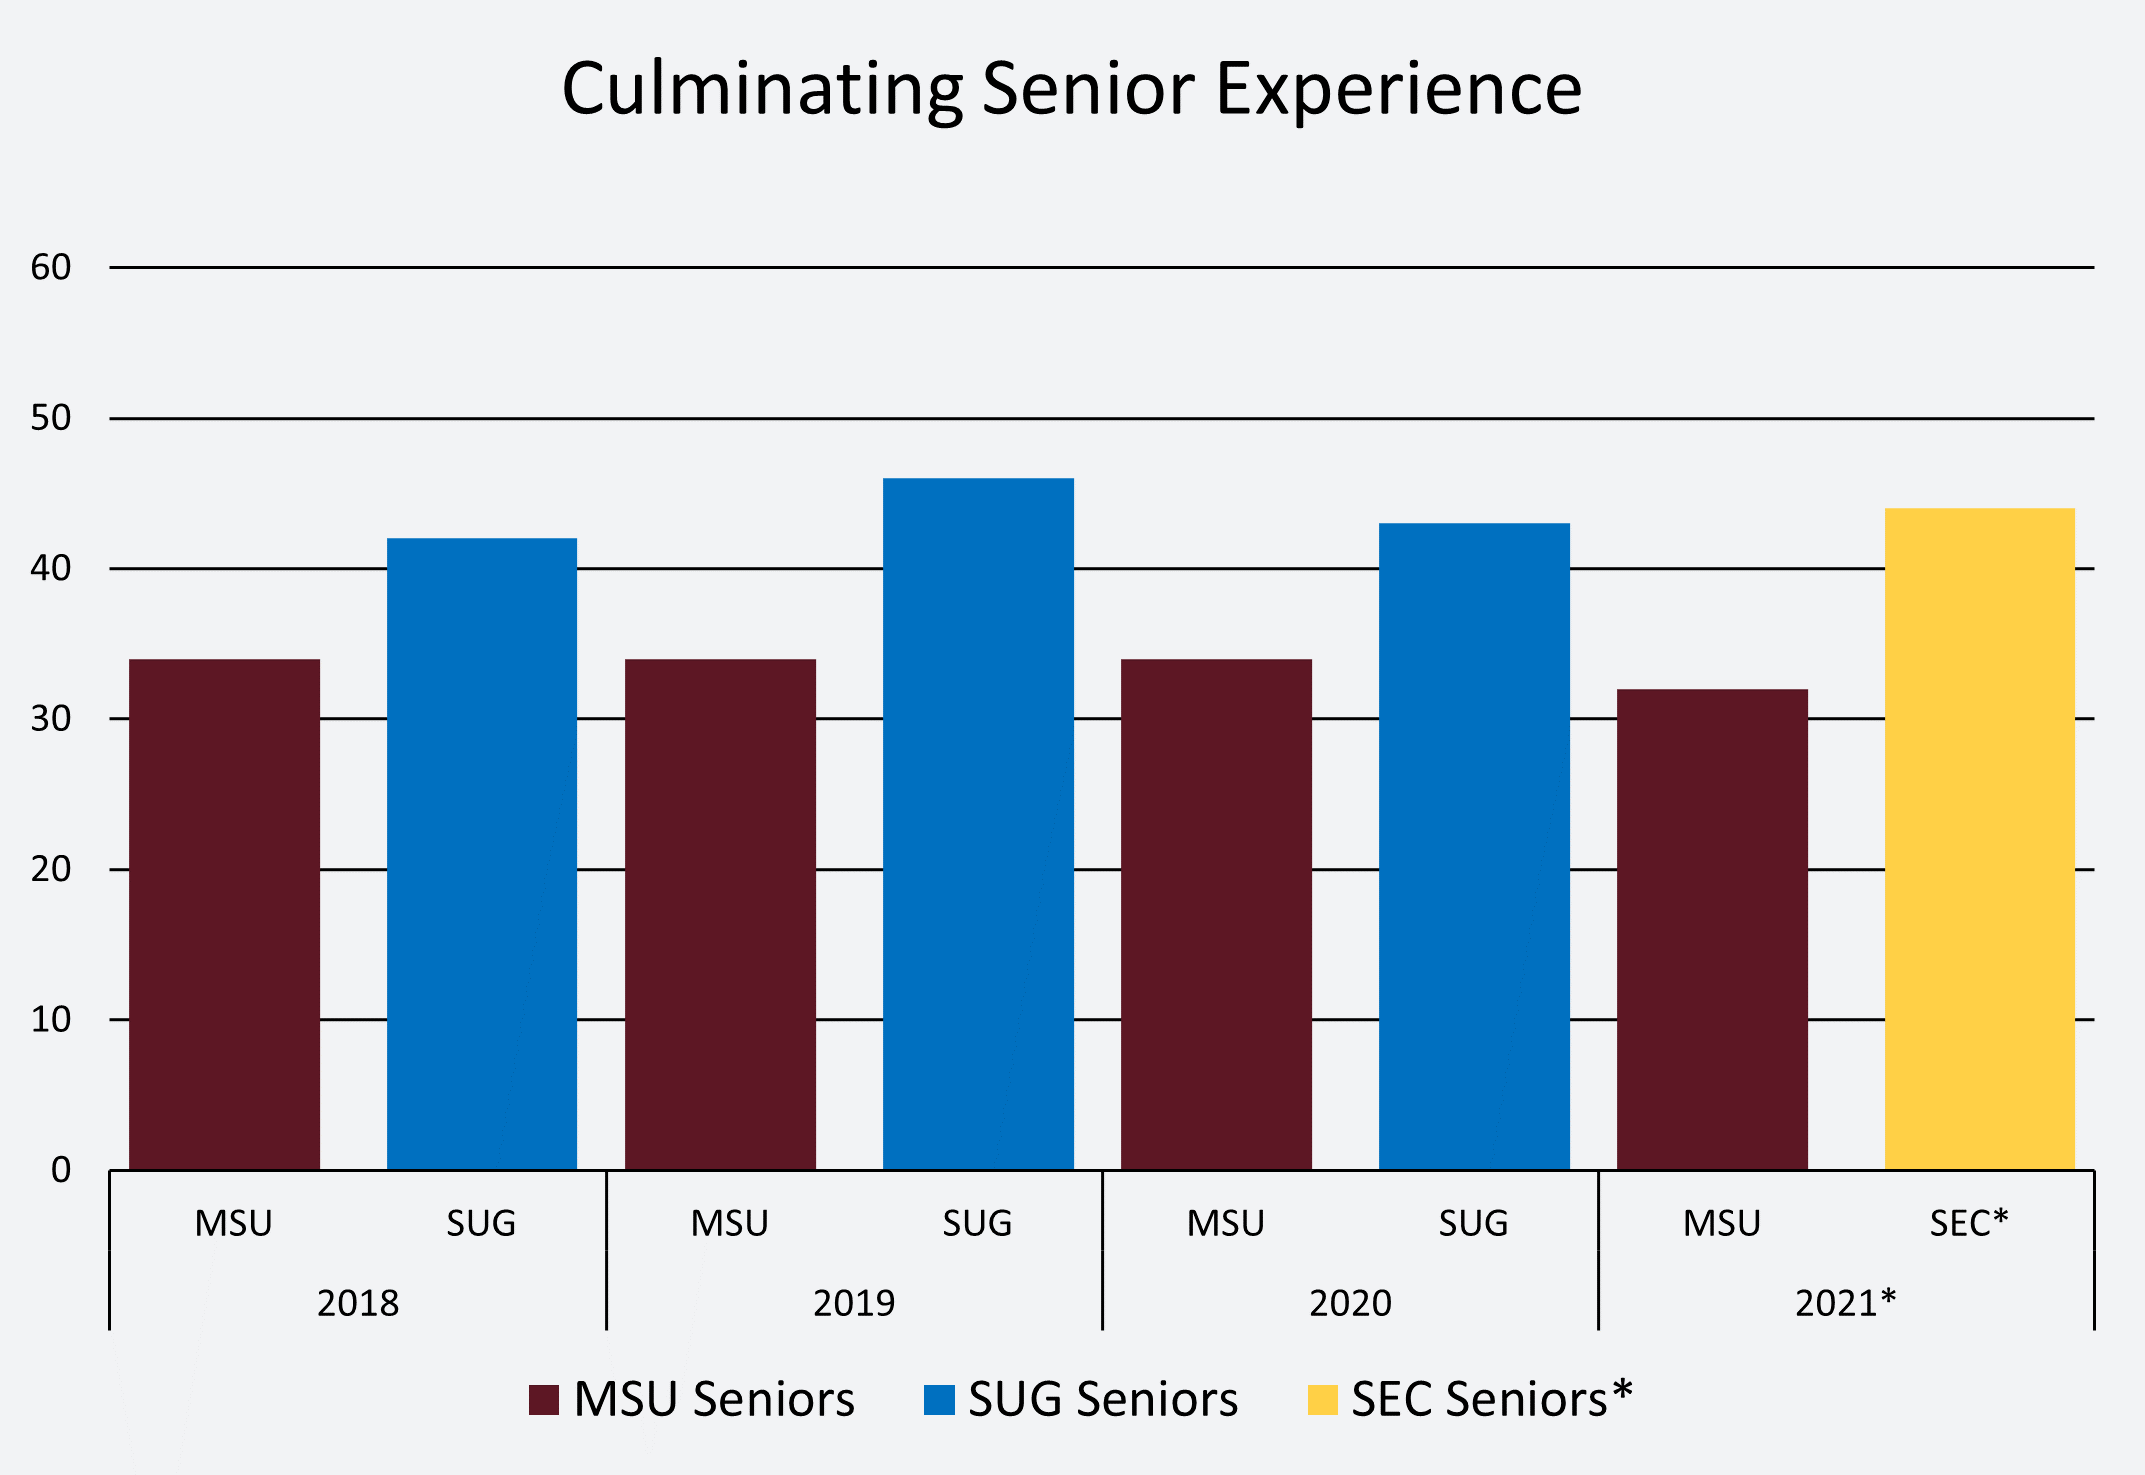 Chart showing NSSE Culminating Senior Experience results between MSU and SUG.